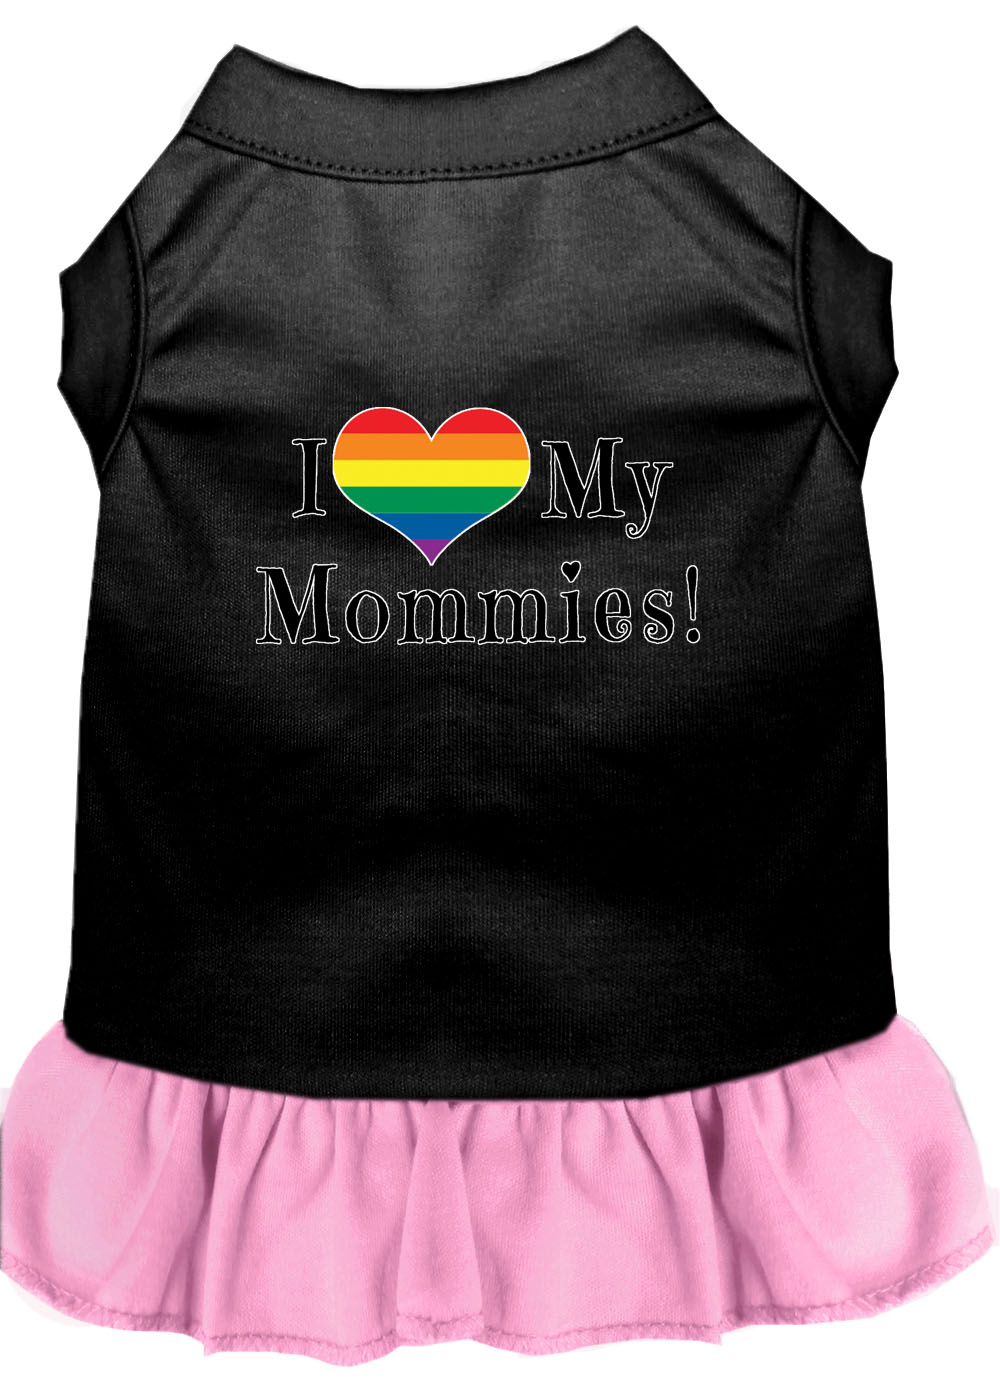 I Heart my Mommies Screen Print Dog Dress Black with Light Pink Med